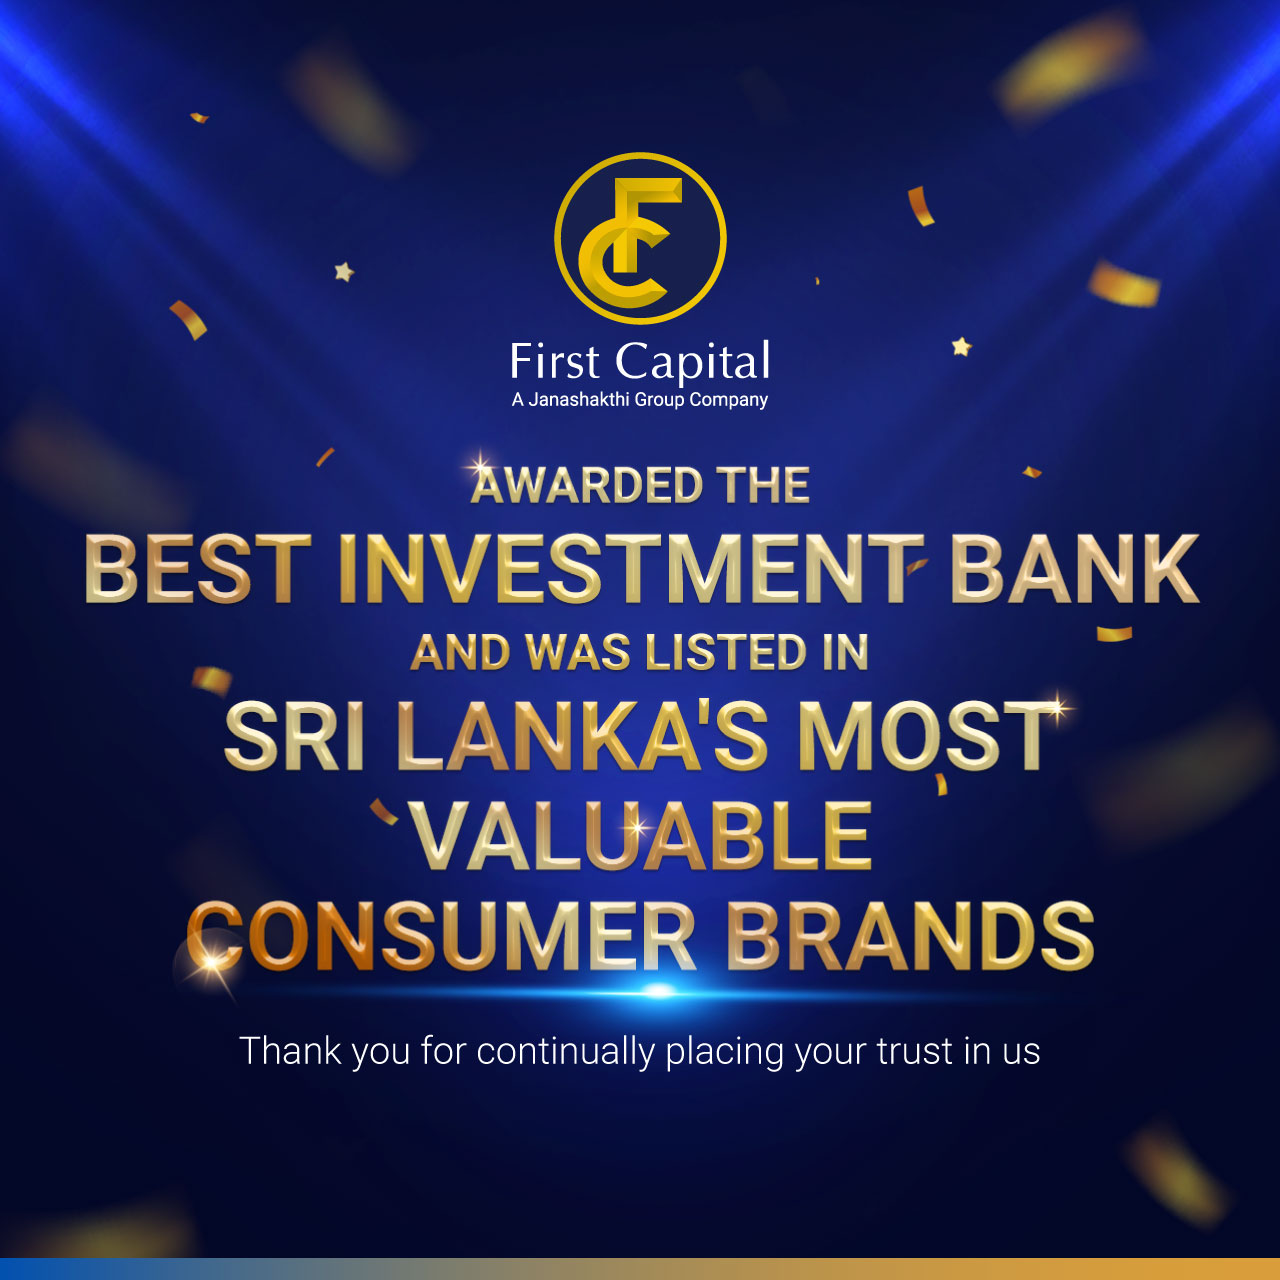 ‘BEST INVESTMENT BANK’ AND ENTERED THE LIST AS ONE OF ‘SRI LANKA’S MOST VALUABLE CONSUMER BRANDS’ BY LMD’S